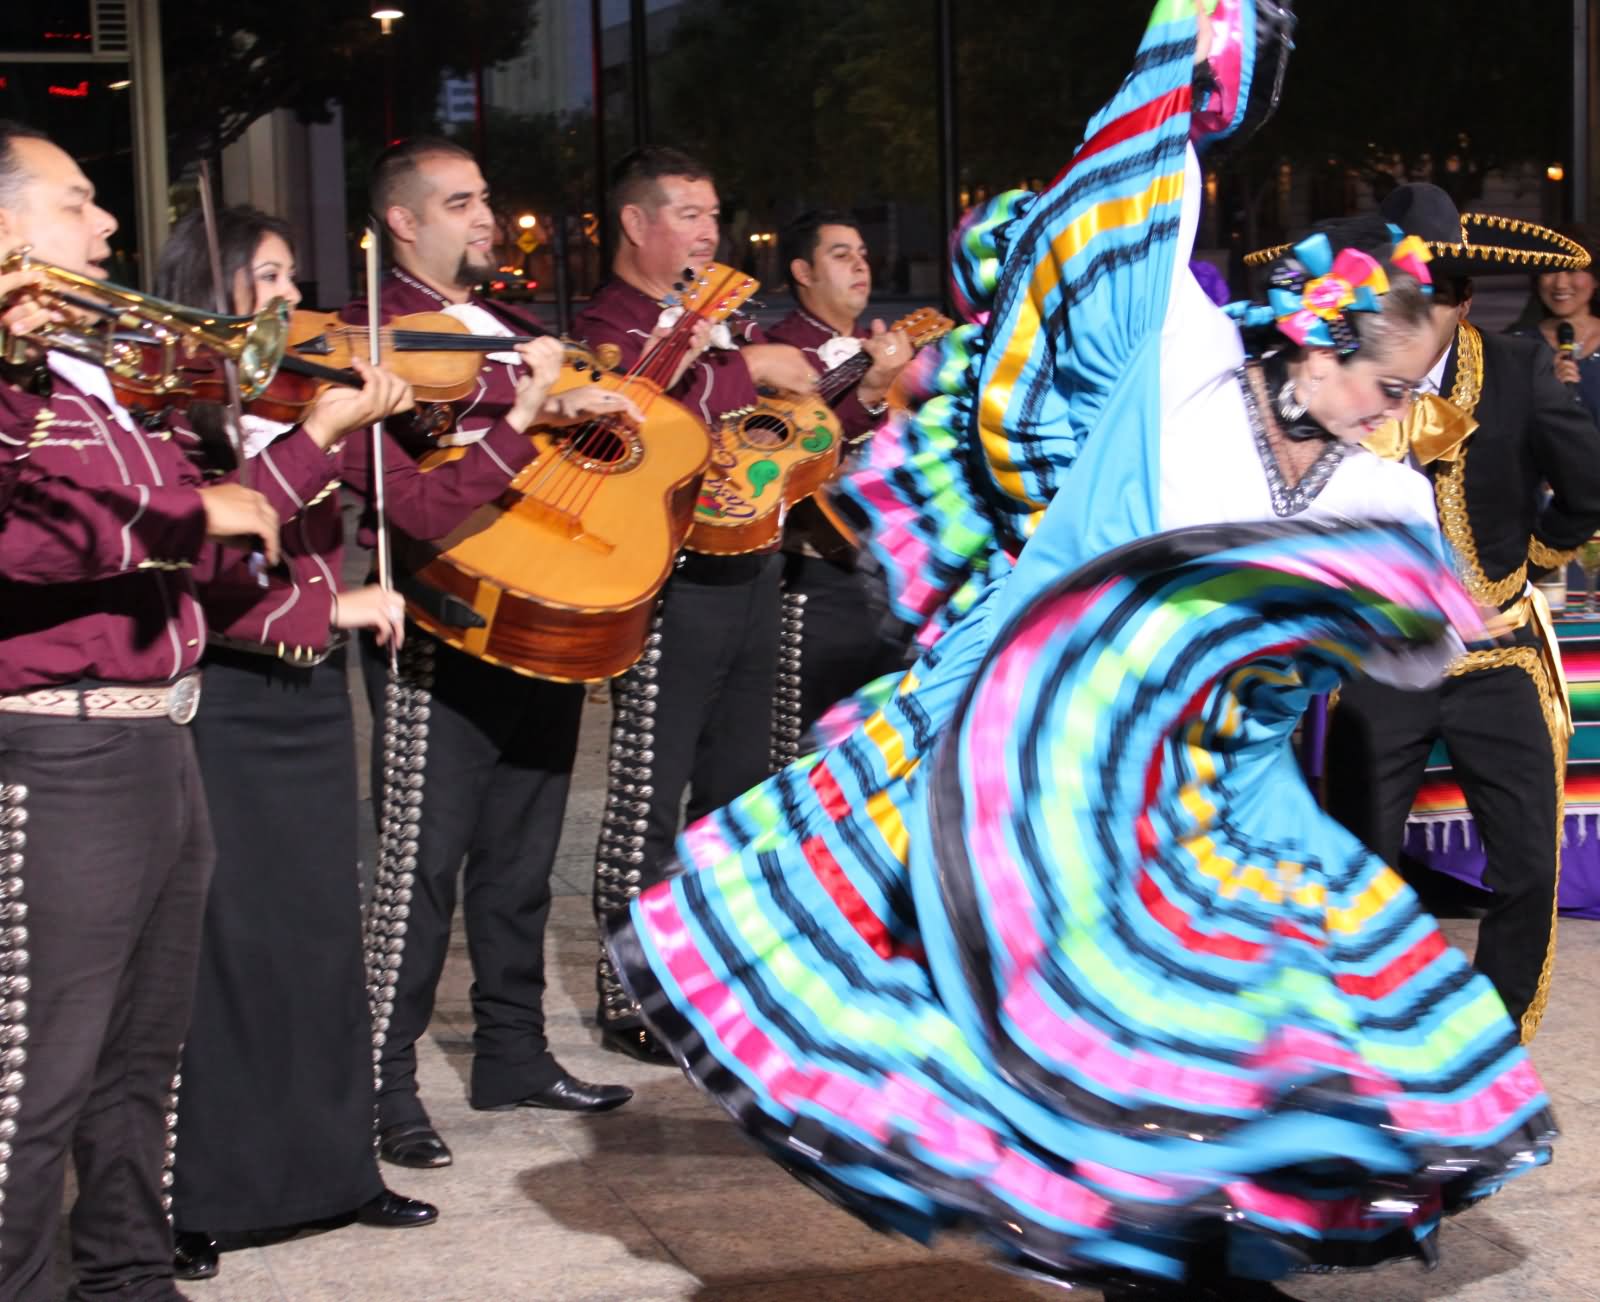 Dance Performance During Celebrations Of Cinco de Mayo